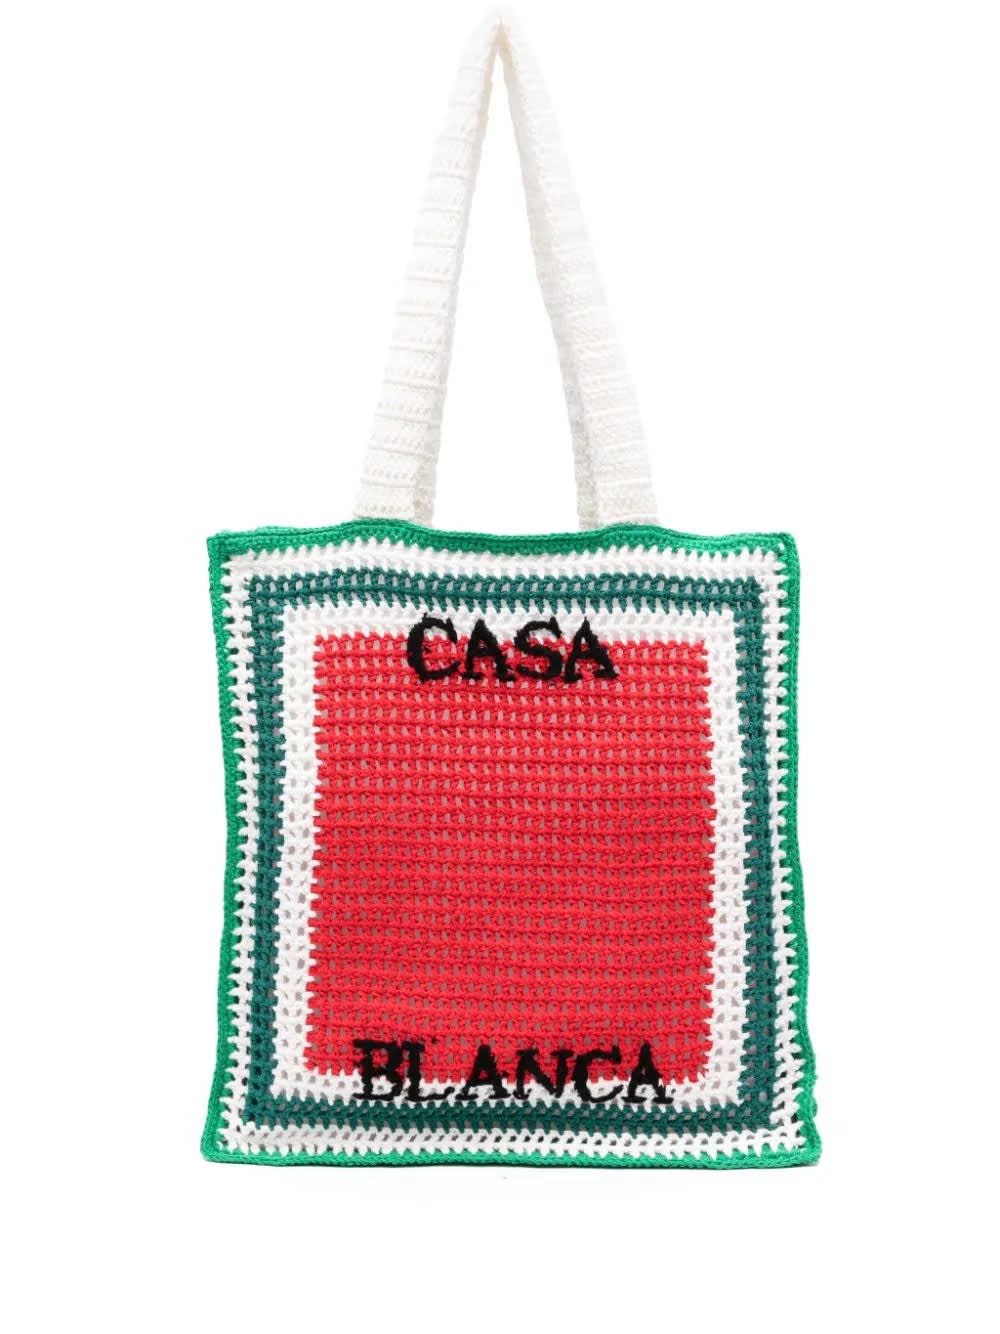 Crocheted Atlantis Tote Bag In Green, Red And White